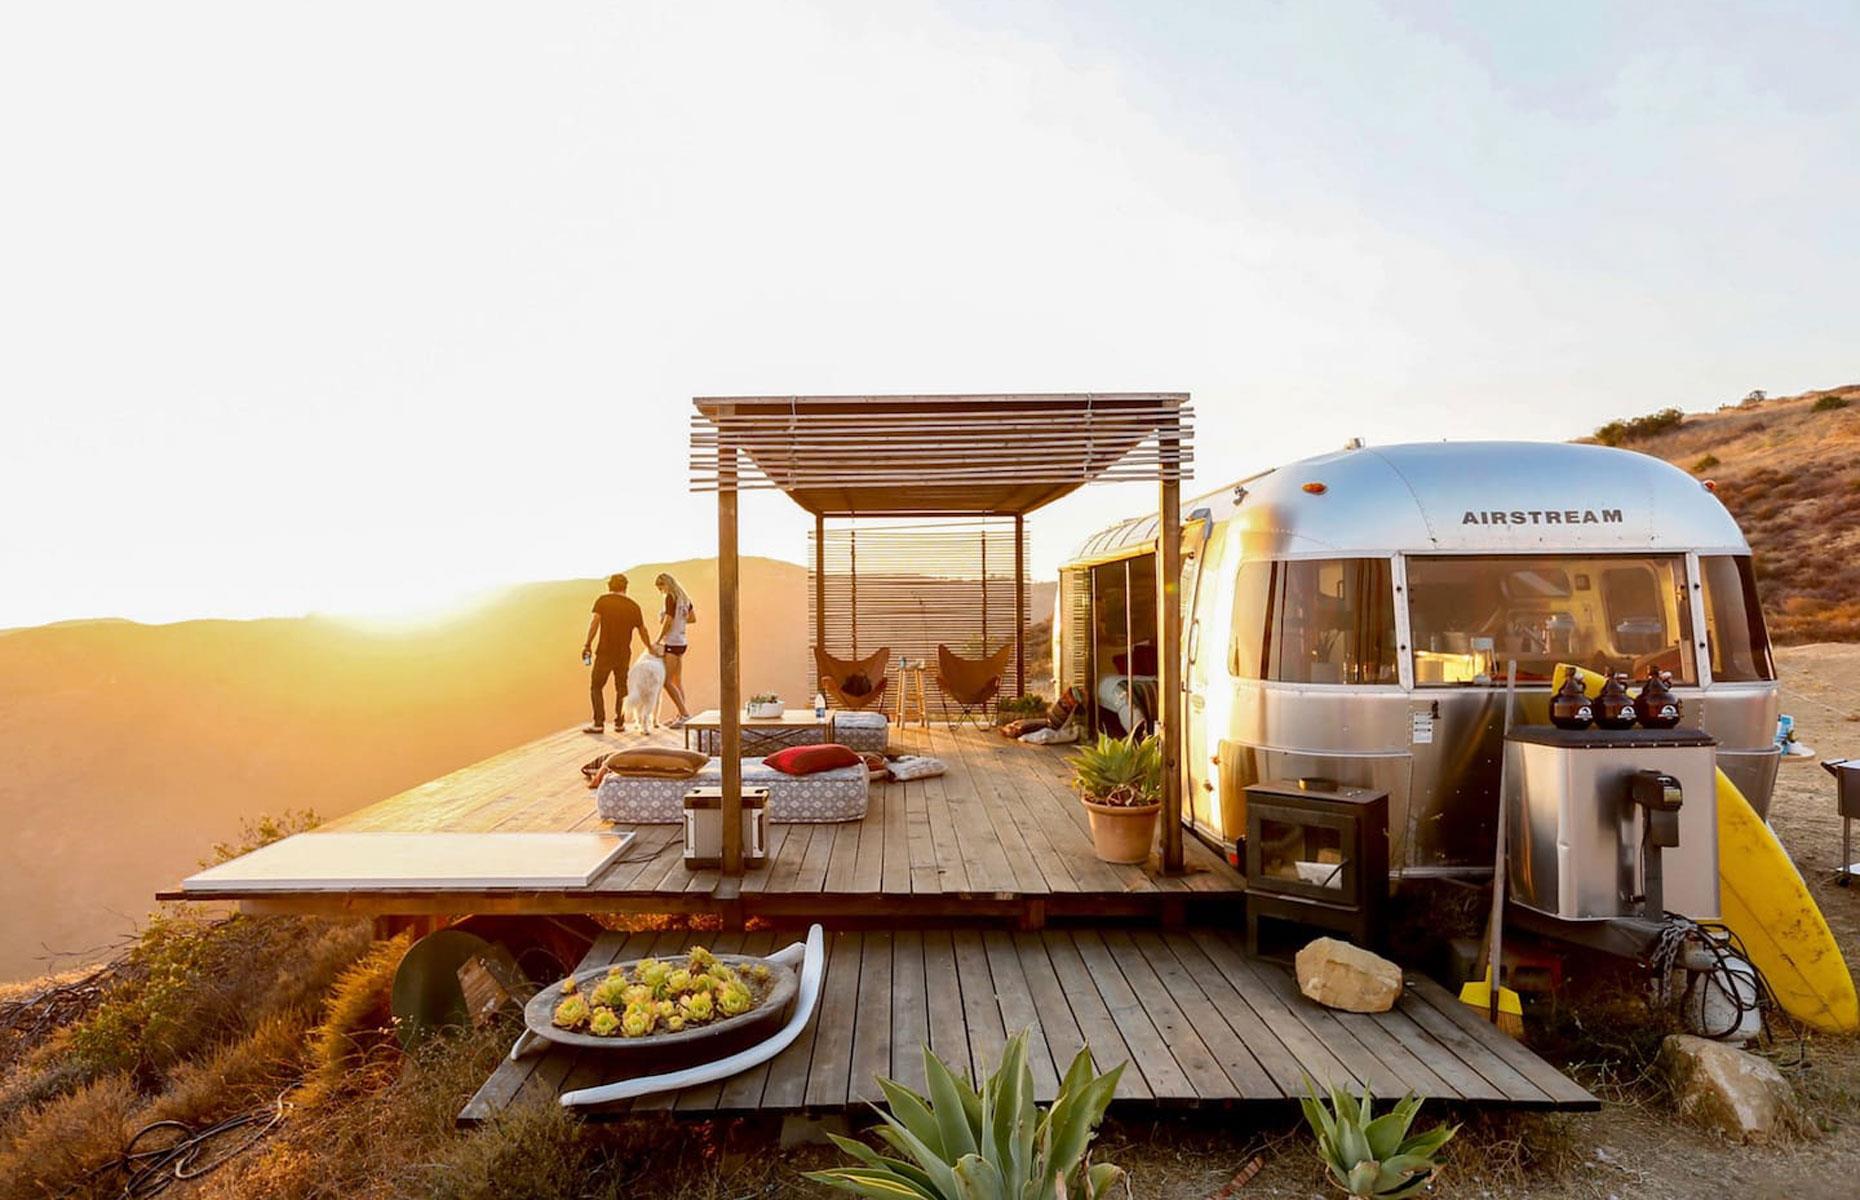 <p>This Airstream – available for <a href="https://www.airbnb.co.uk/rooms/3406062">rent via Airbnb</a> – is located on a private bluff in Malibu, California with brilliant views out to the ocean. The trailer has been reconfigured as a large luxury studio with a high-end kitchenette, bathroom and queen-sized bed and it's furnished with cozy wool rugs, cushions and blankets for chilling on the deck.</p>